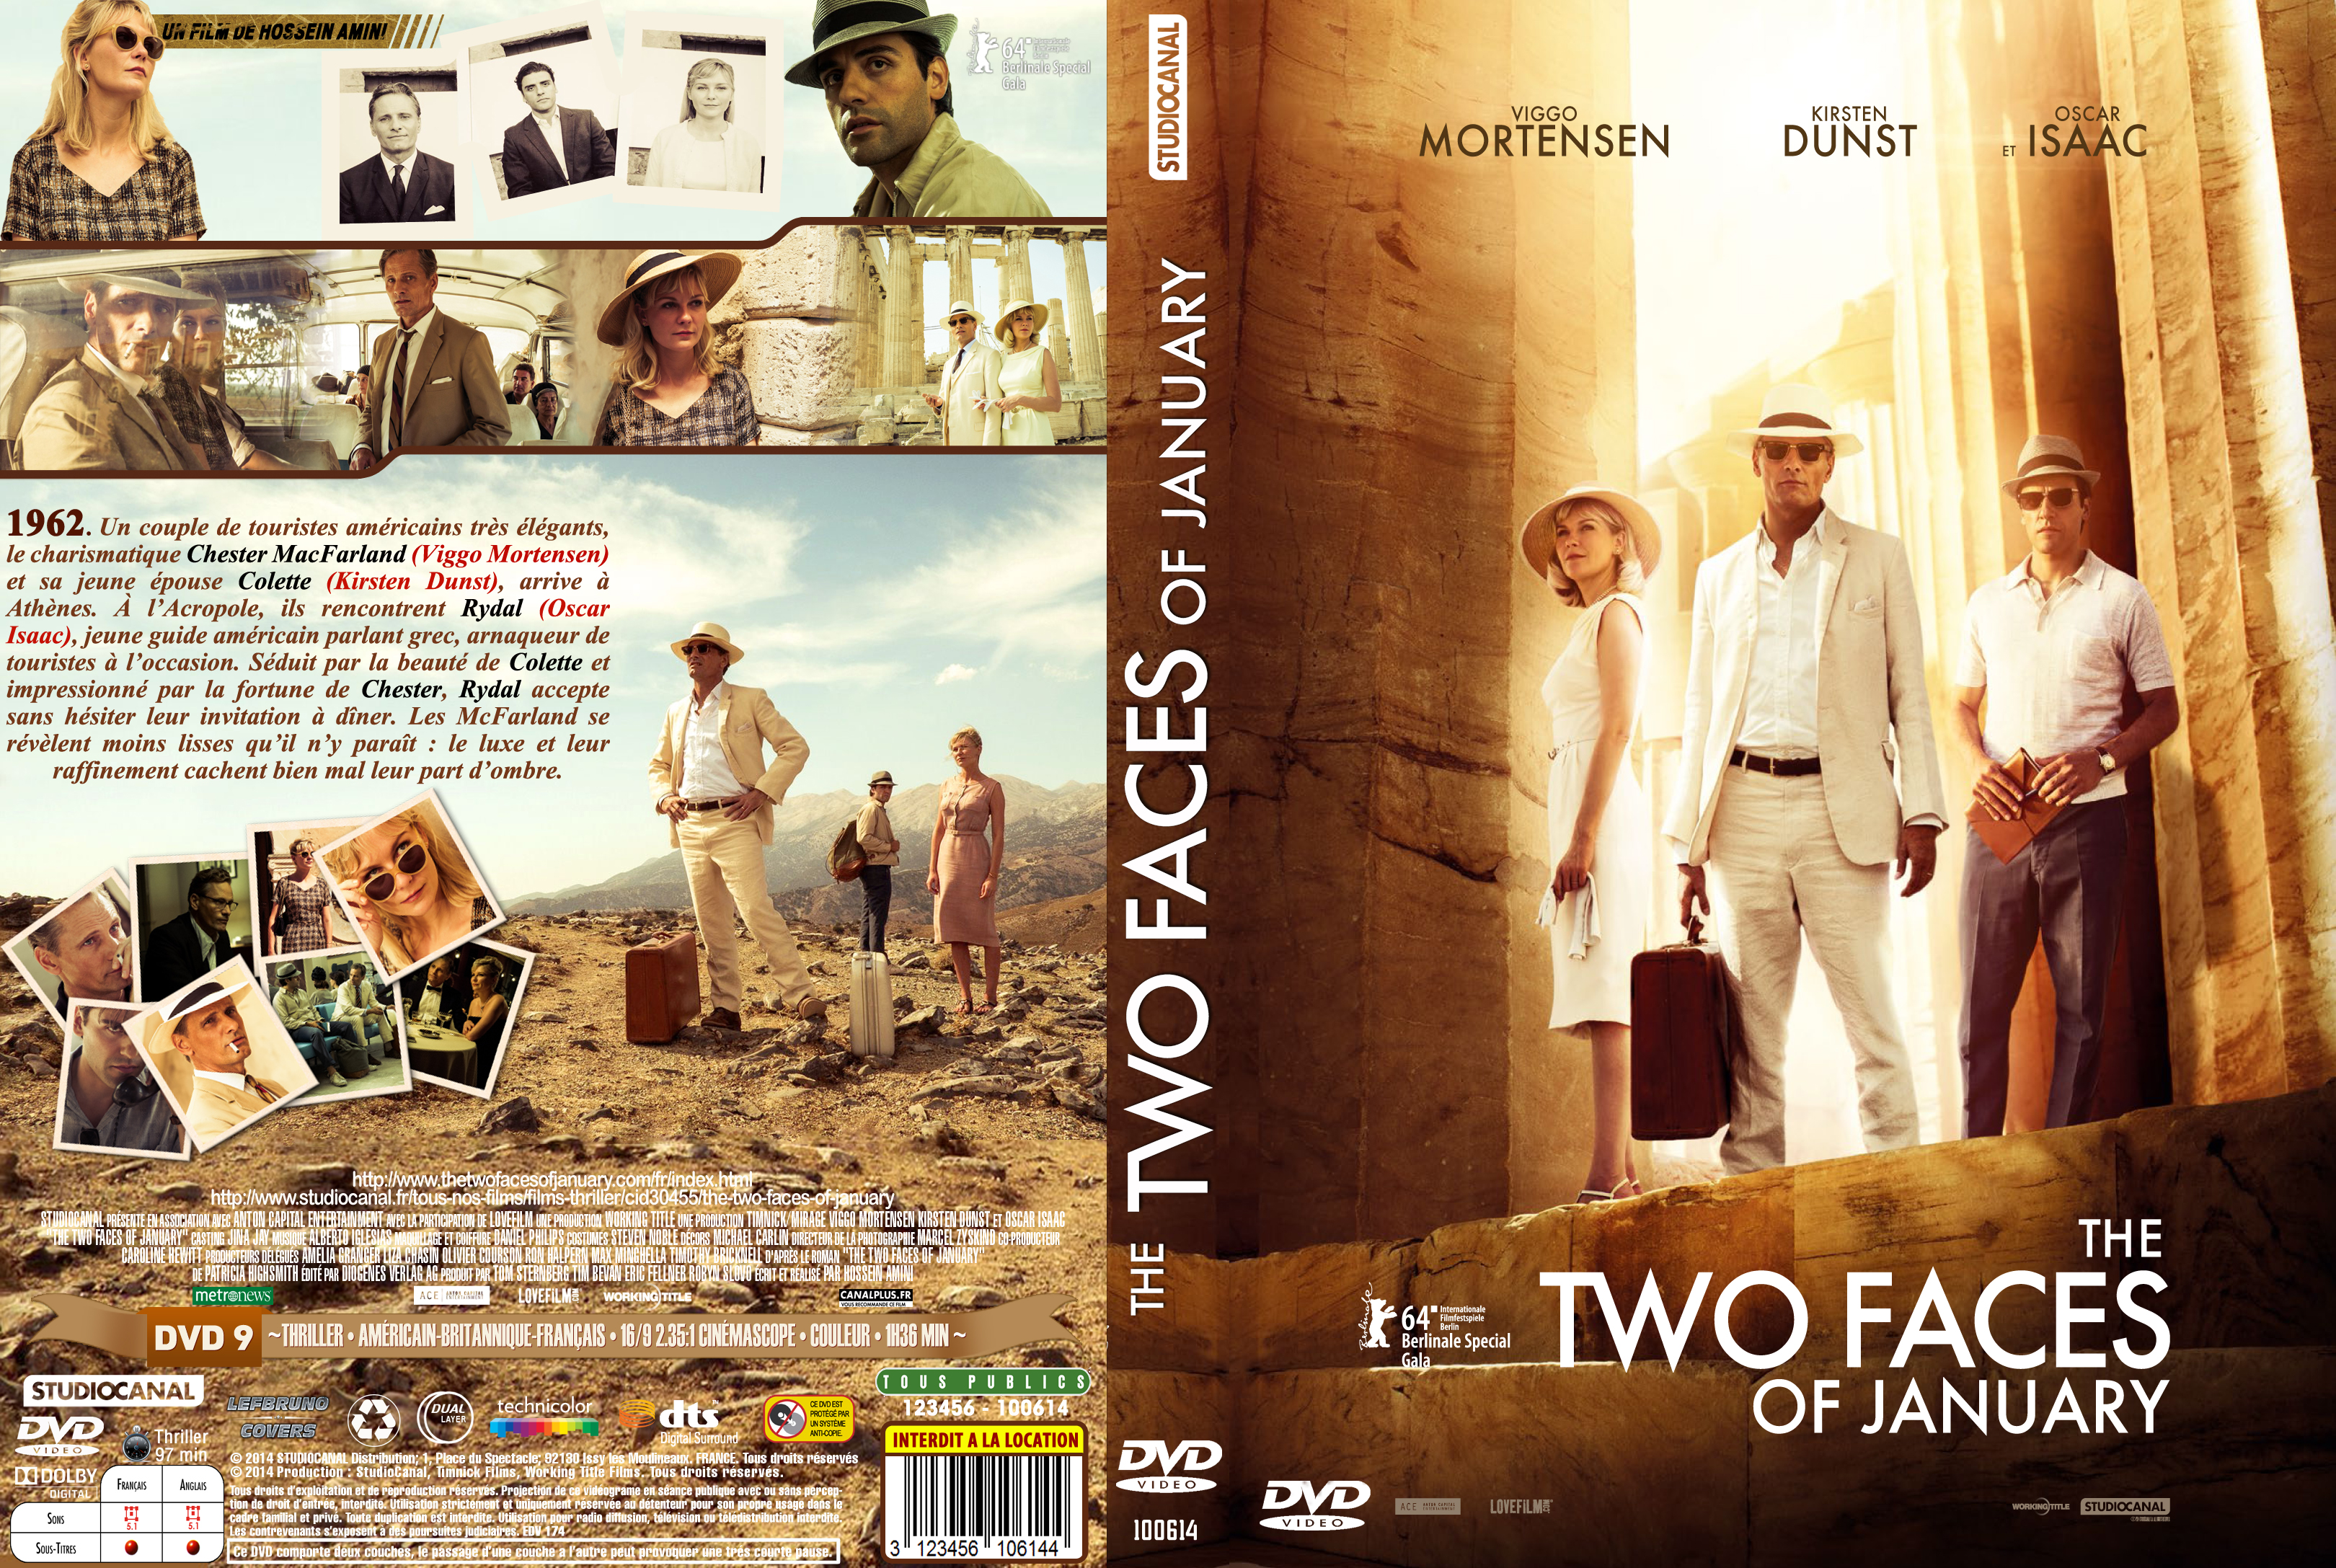 Jaquette DVD The Two Faces of January custom